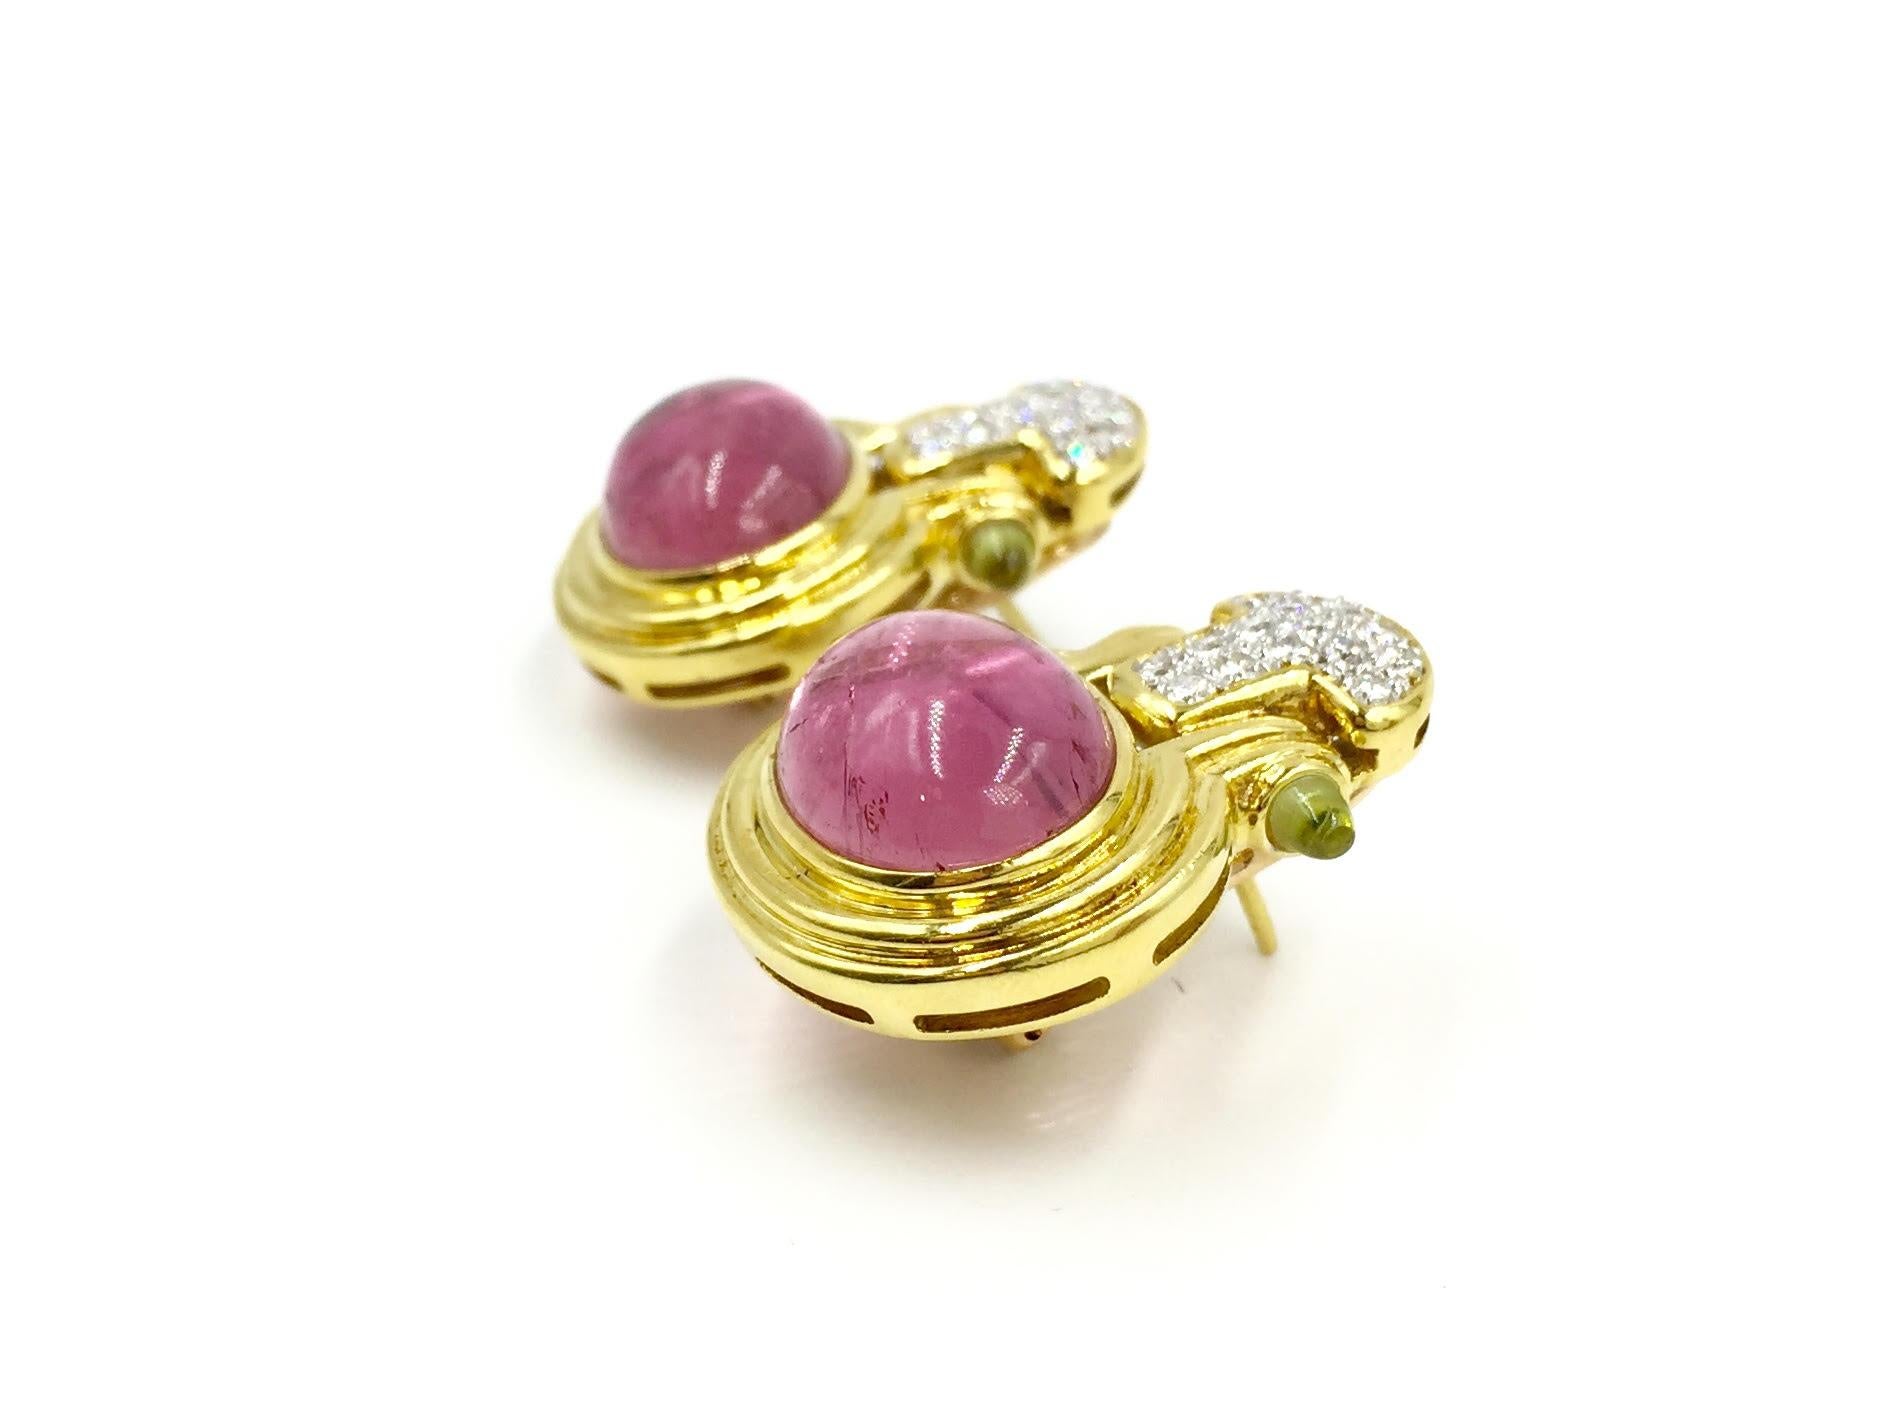 Gorgeous colorful 18 karat yellow gold earrings with natural pink tourmaline, white diamonds and peridot gemstones. Diamond quality is approximately G color, SI1 clarity at approximately .35 carats total weight, set in white gold to give them an